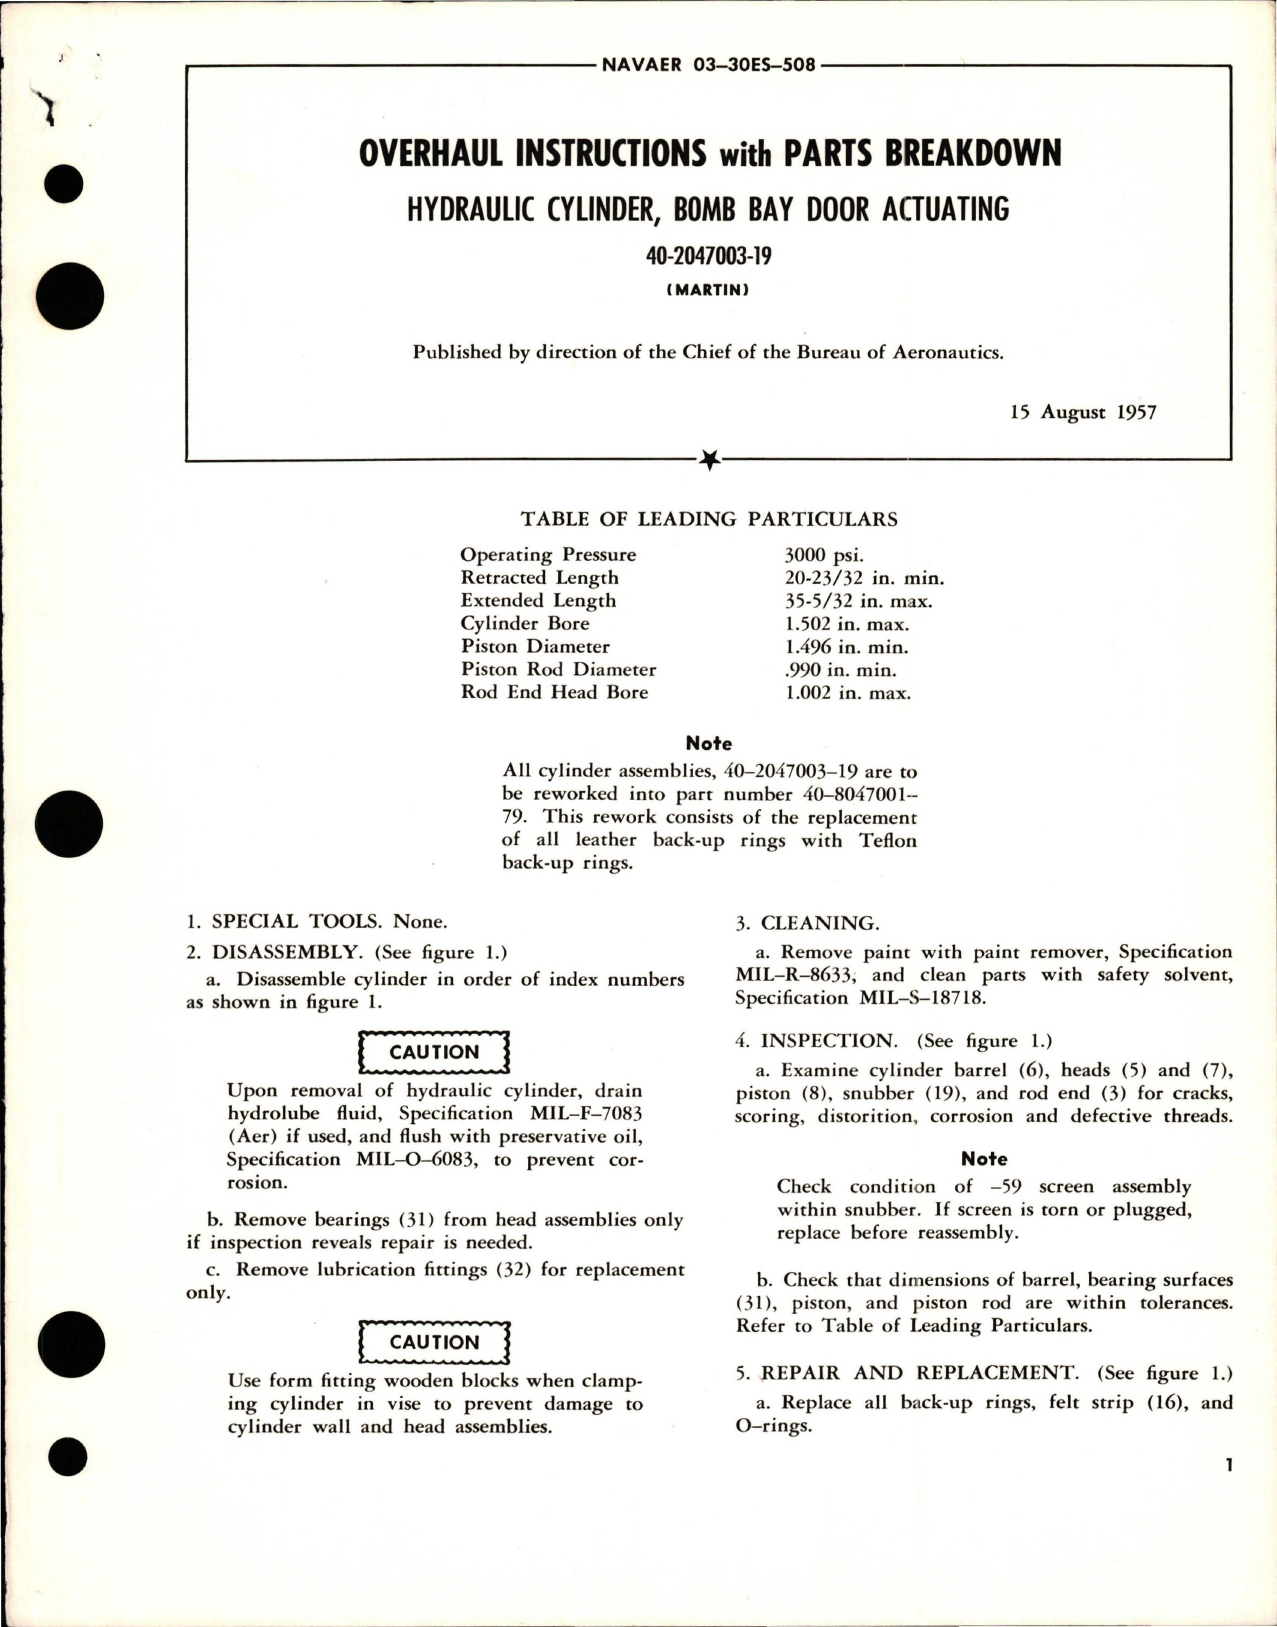 Sample page 1 from AirCorps Library document: Overhaul Instructions with Parts Breakdown for Bomb Bay Door Actuating Hydraulic Cylinder - 40-2047003-9 